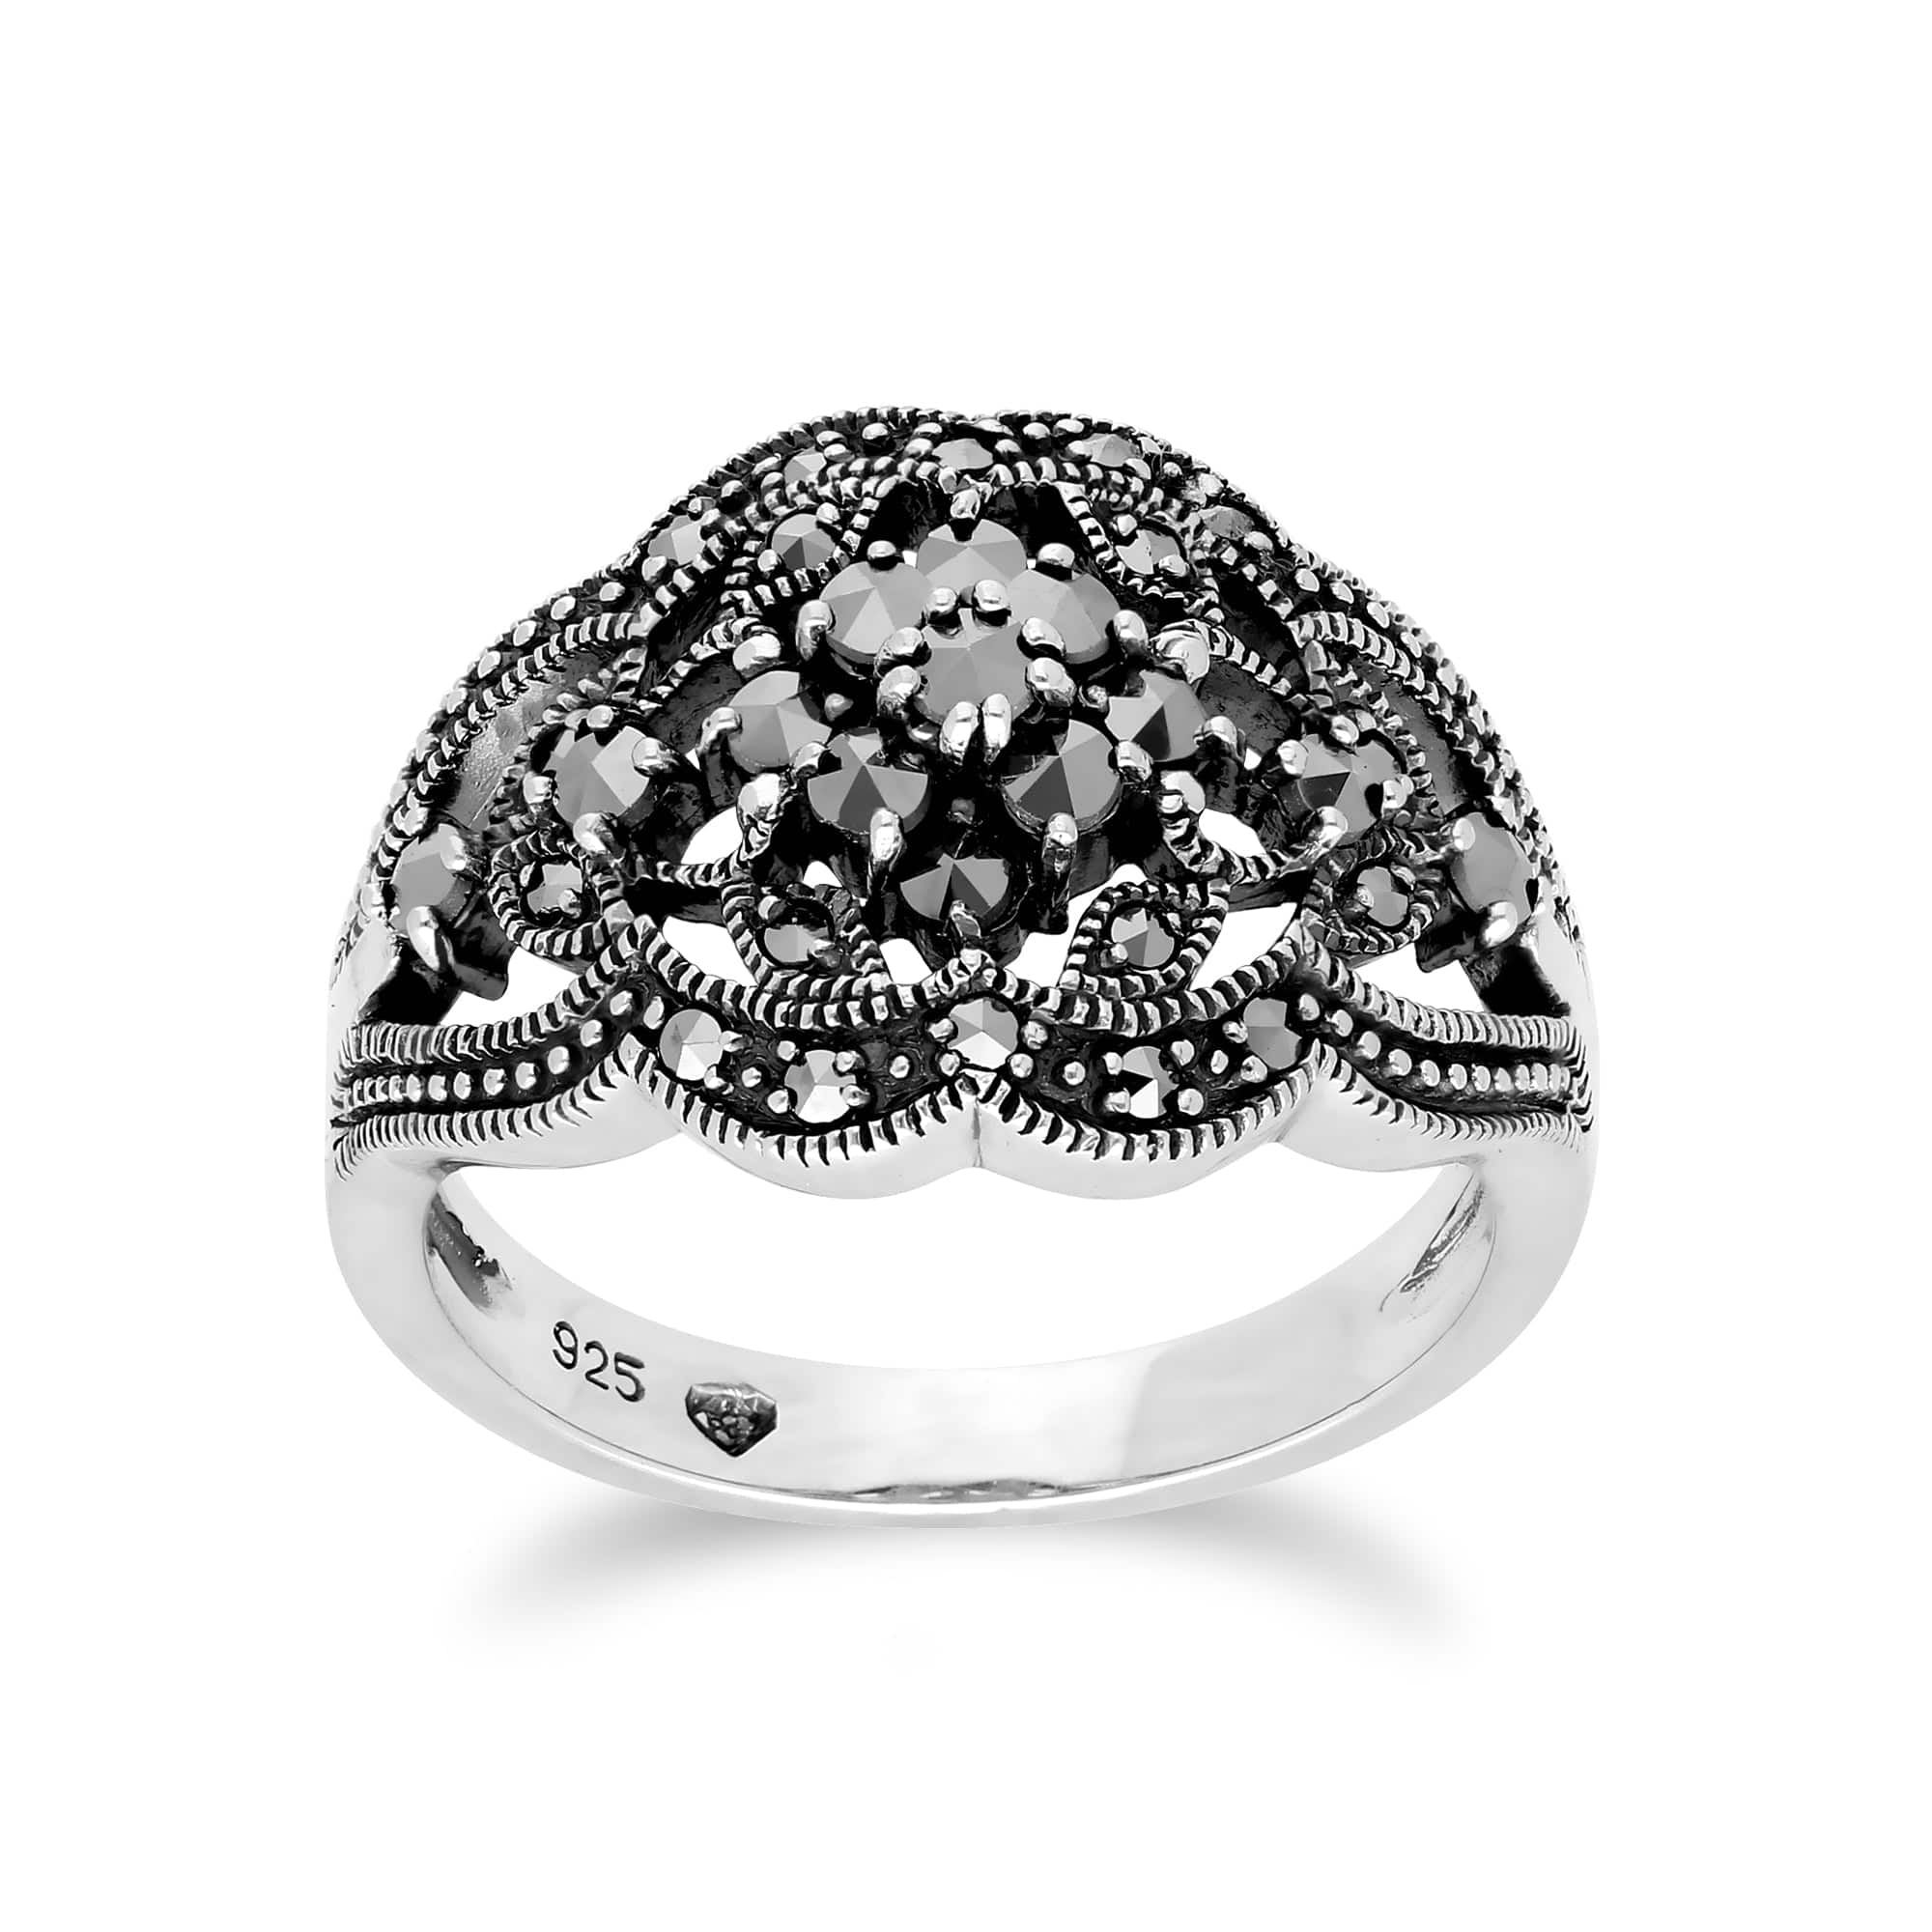 214R568501925 Art Nouveau Style Round Marcasite Cluster Ring in 925 Sterling Silver 1